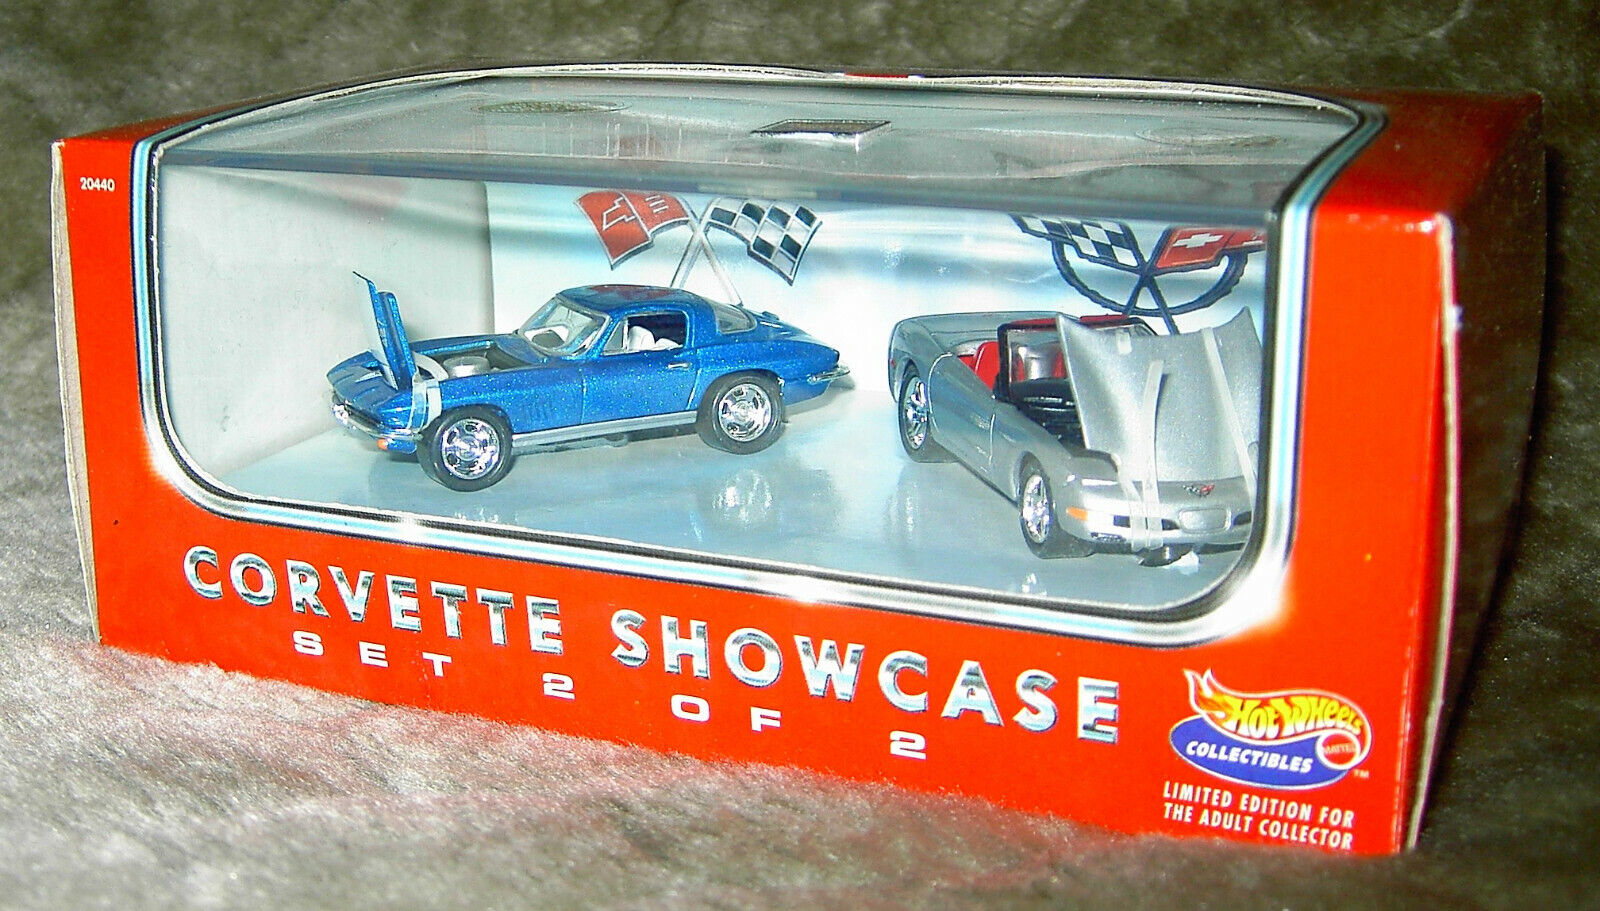 Corvette. Hot Wheels, Mint, New. 1:64 th scale, in box with case. Chevrolet.